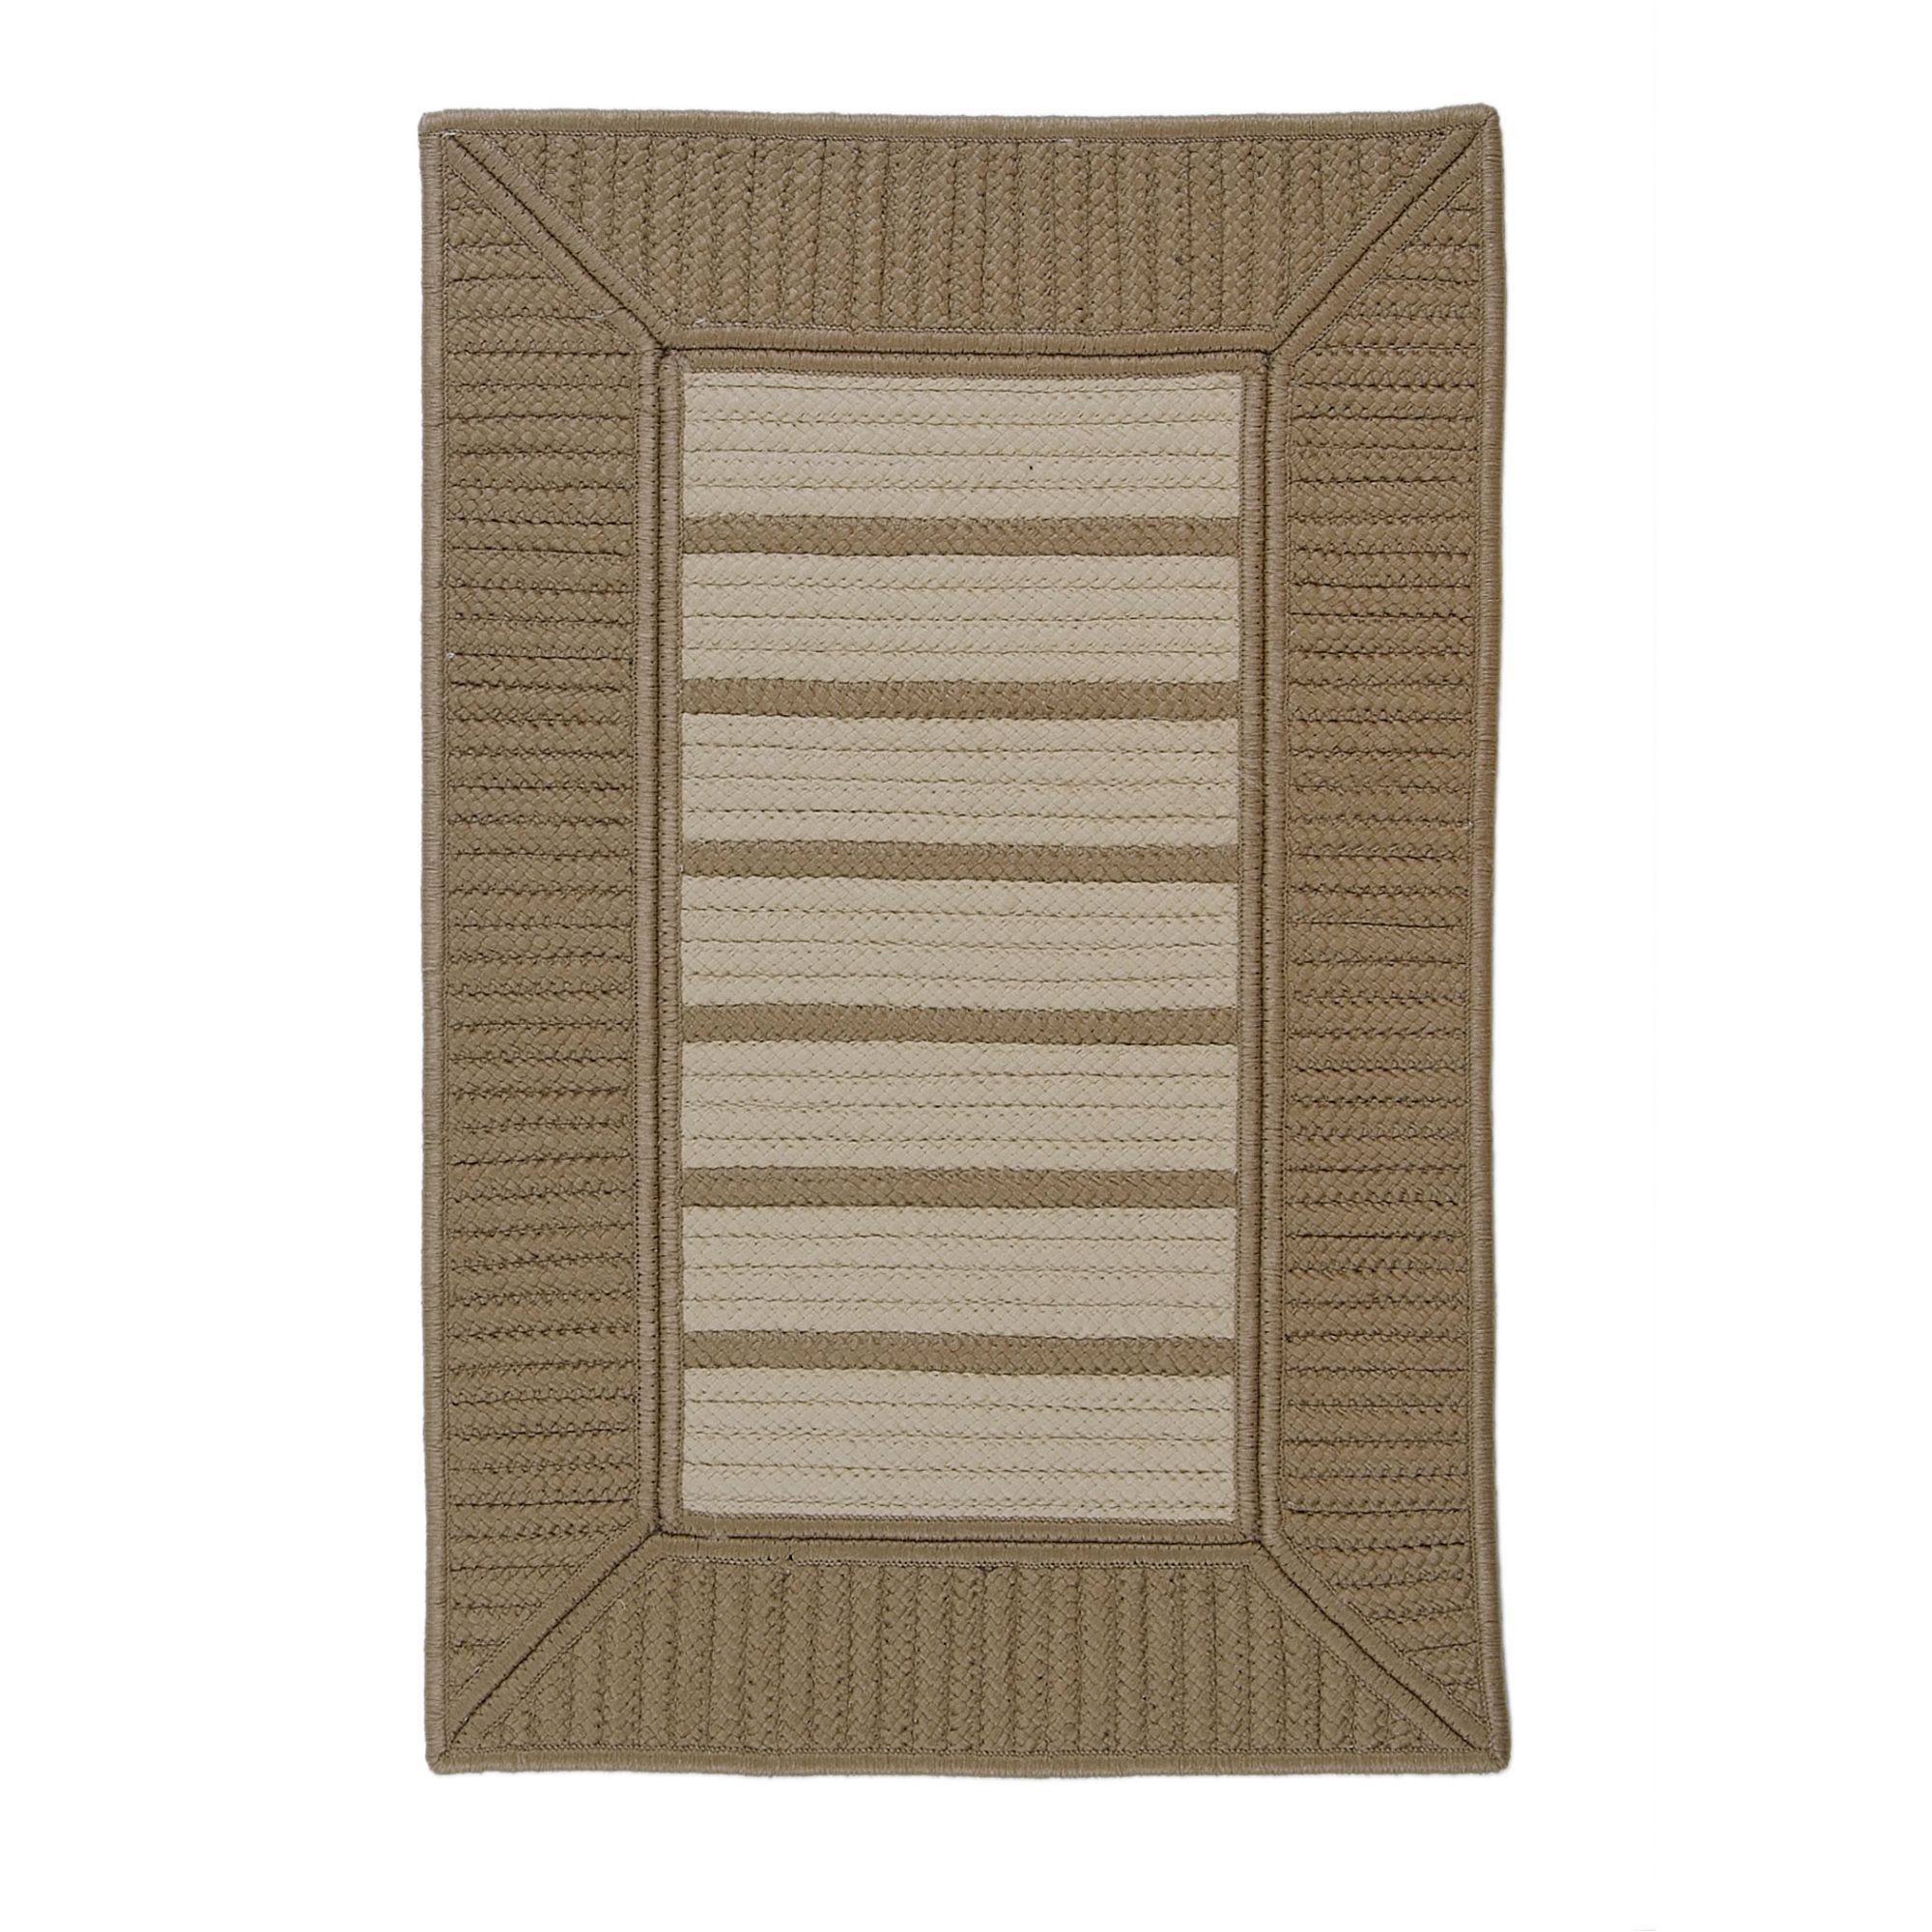 Colonial Mills 4' x 6' Tan and Beige All Purpose Handcrafted Reversible Rectangular Outdoor Area Throw Rug